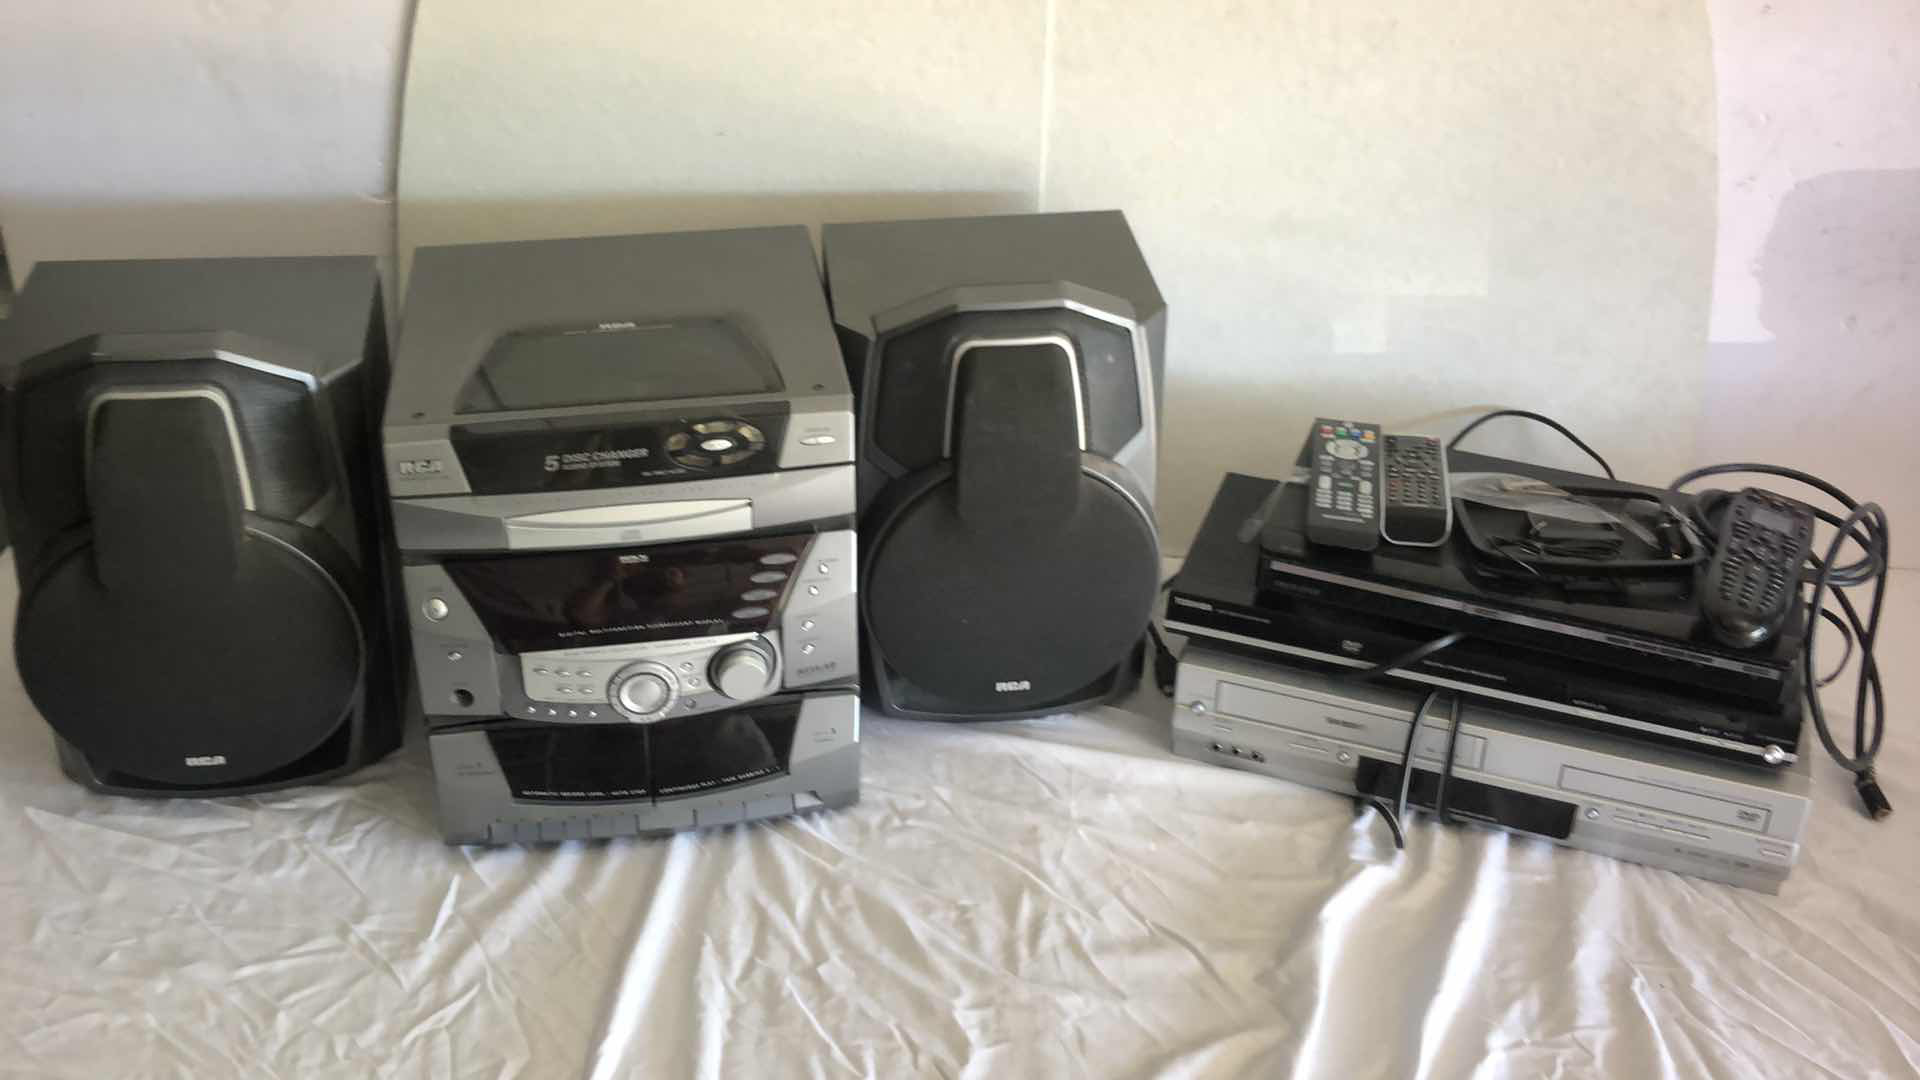 Photo 3 of ENTERTAINMENT BUNDLE RCA RS-255KM AUDIO SYSTEM, DVD AND VHS PLAYERS W REMOTES, STAR TREK VHS SETS